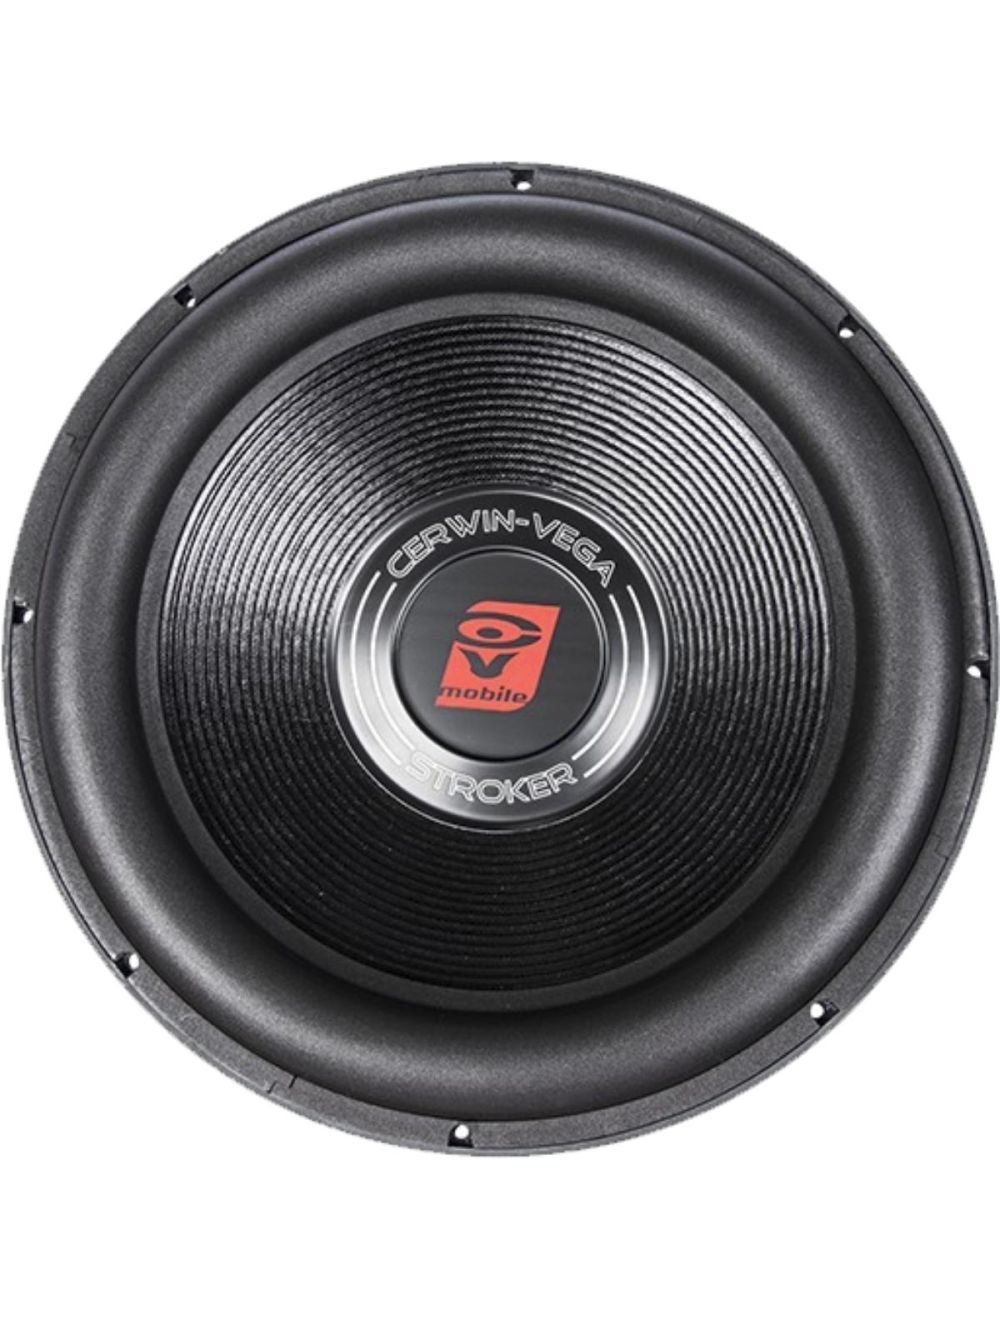 ST124D - STROKER 2000 Watts 4 Ohms/1000Watts RMS Power Max 12-Inch Dual Voice Coil Subwoofer - Cerwin Vega